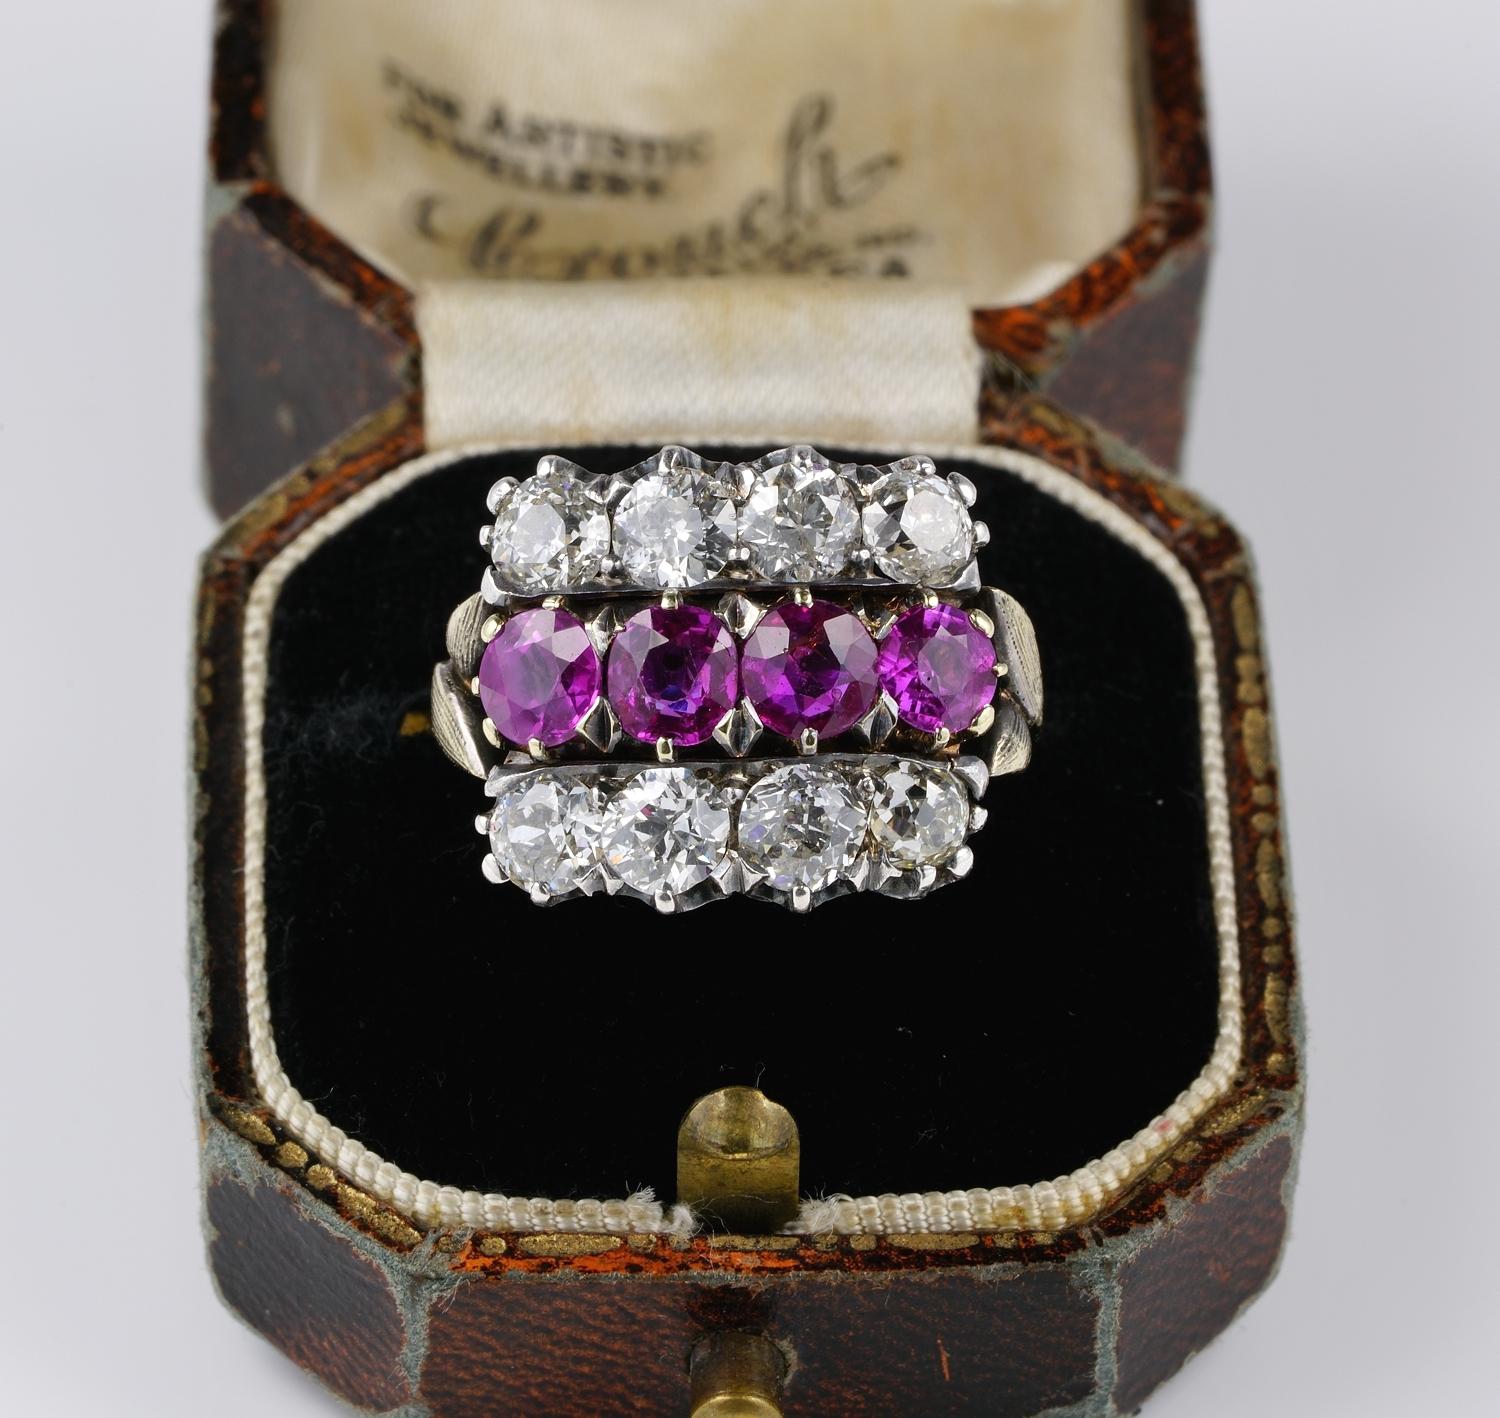 The rarest 

A large, exceptional and extremely beautiful Victorian cluster ring
Authentic 1860 ca, hand crafted as unique of solid 18 KT gold and Silver
Made to leave the viewer speechless!
Panel Crown is a rectangular composition made of three